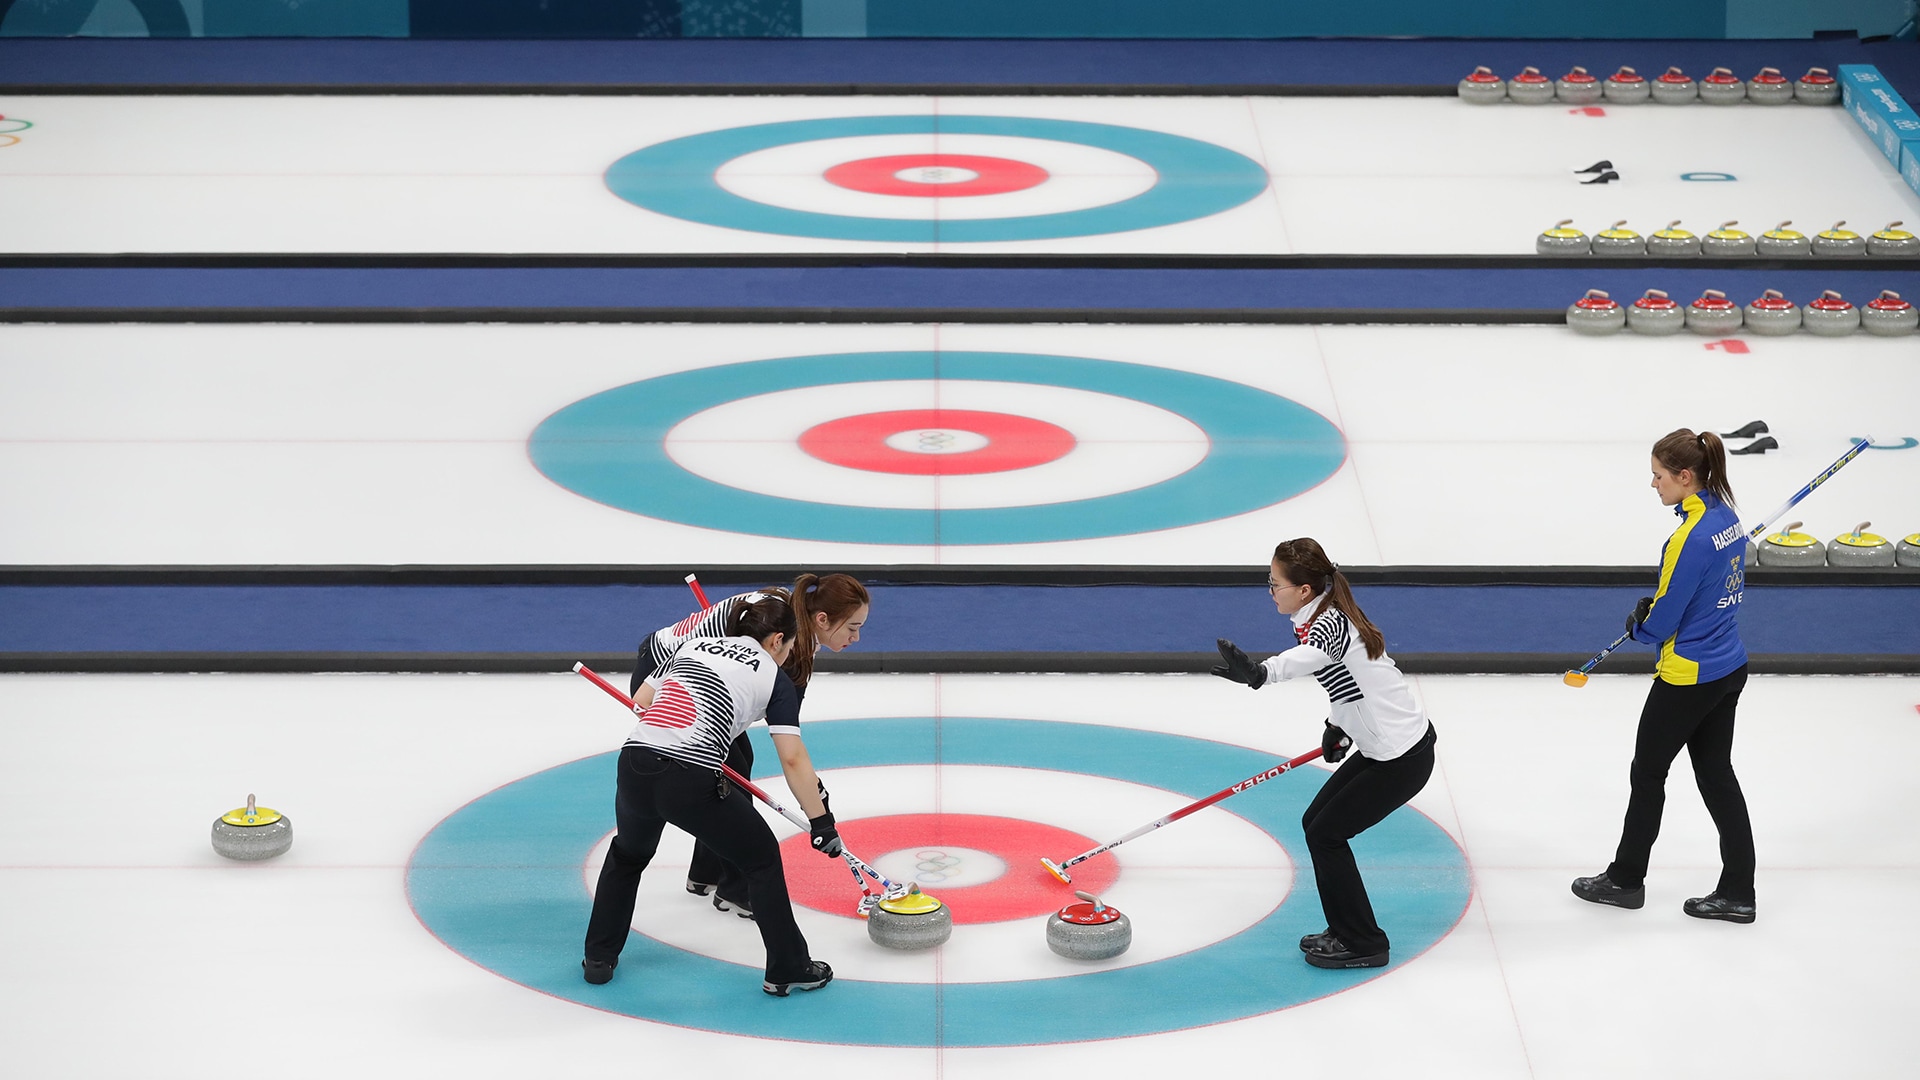 Curling at the 2022 Winter Olympics